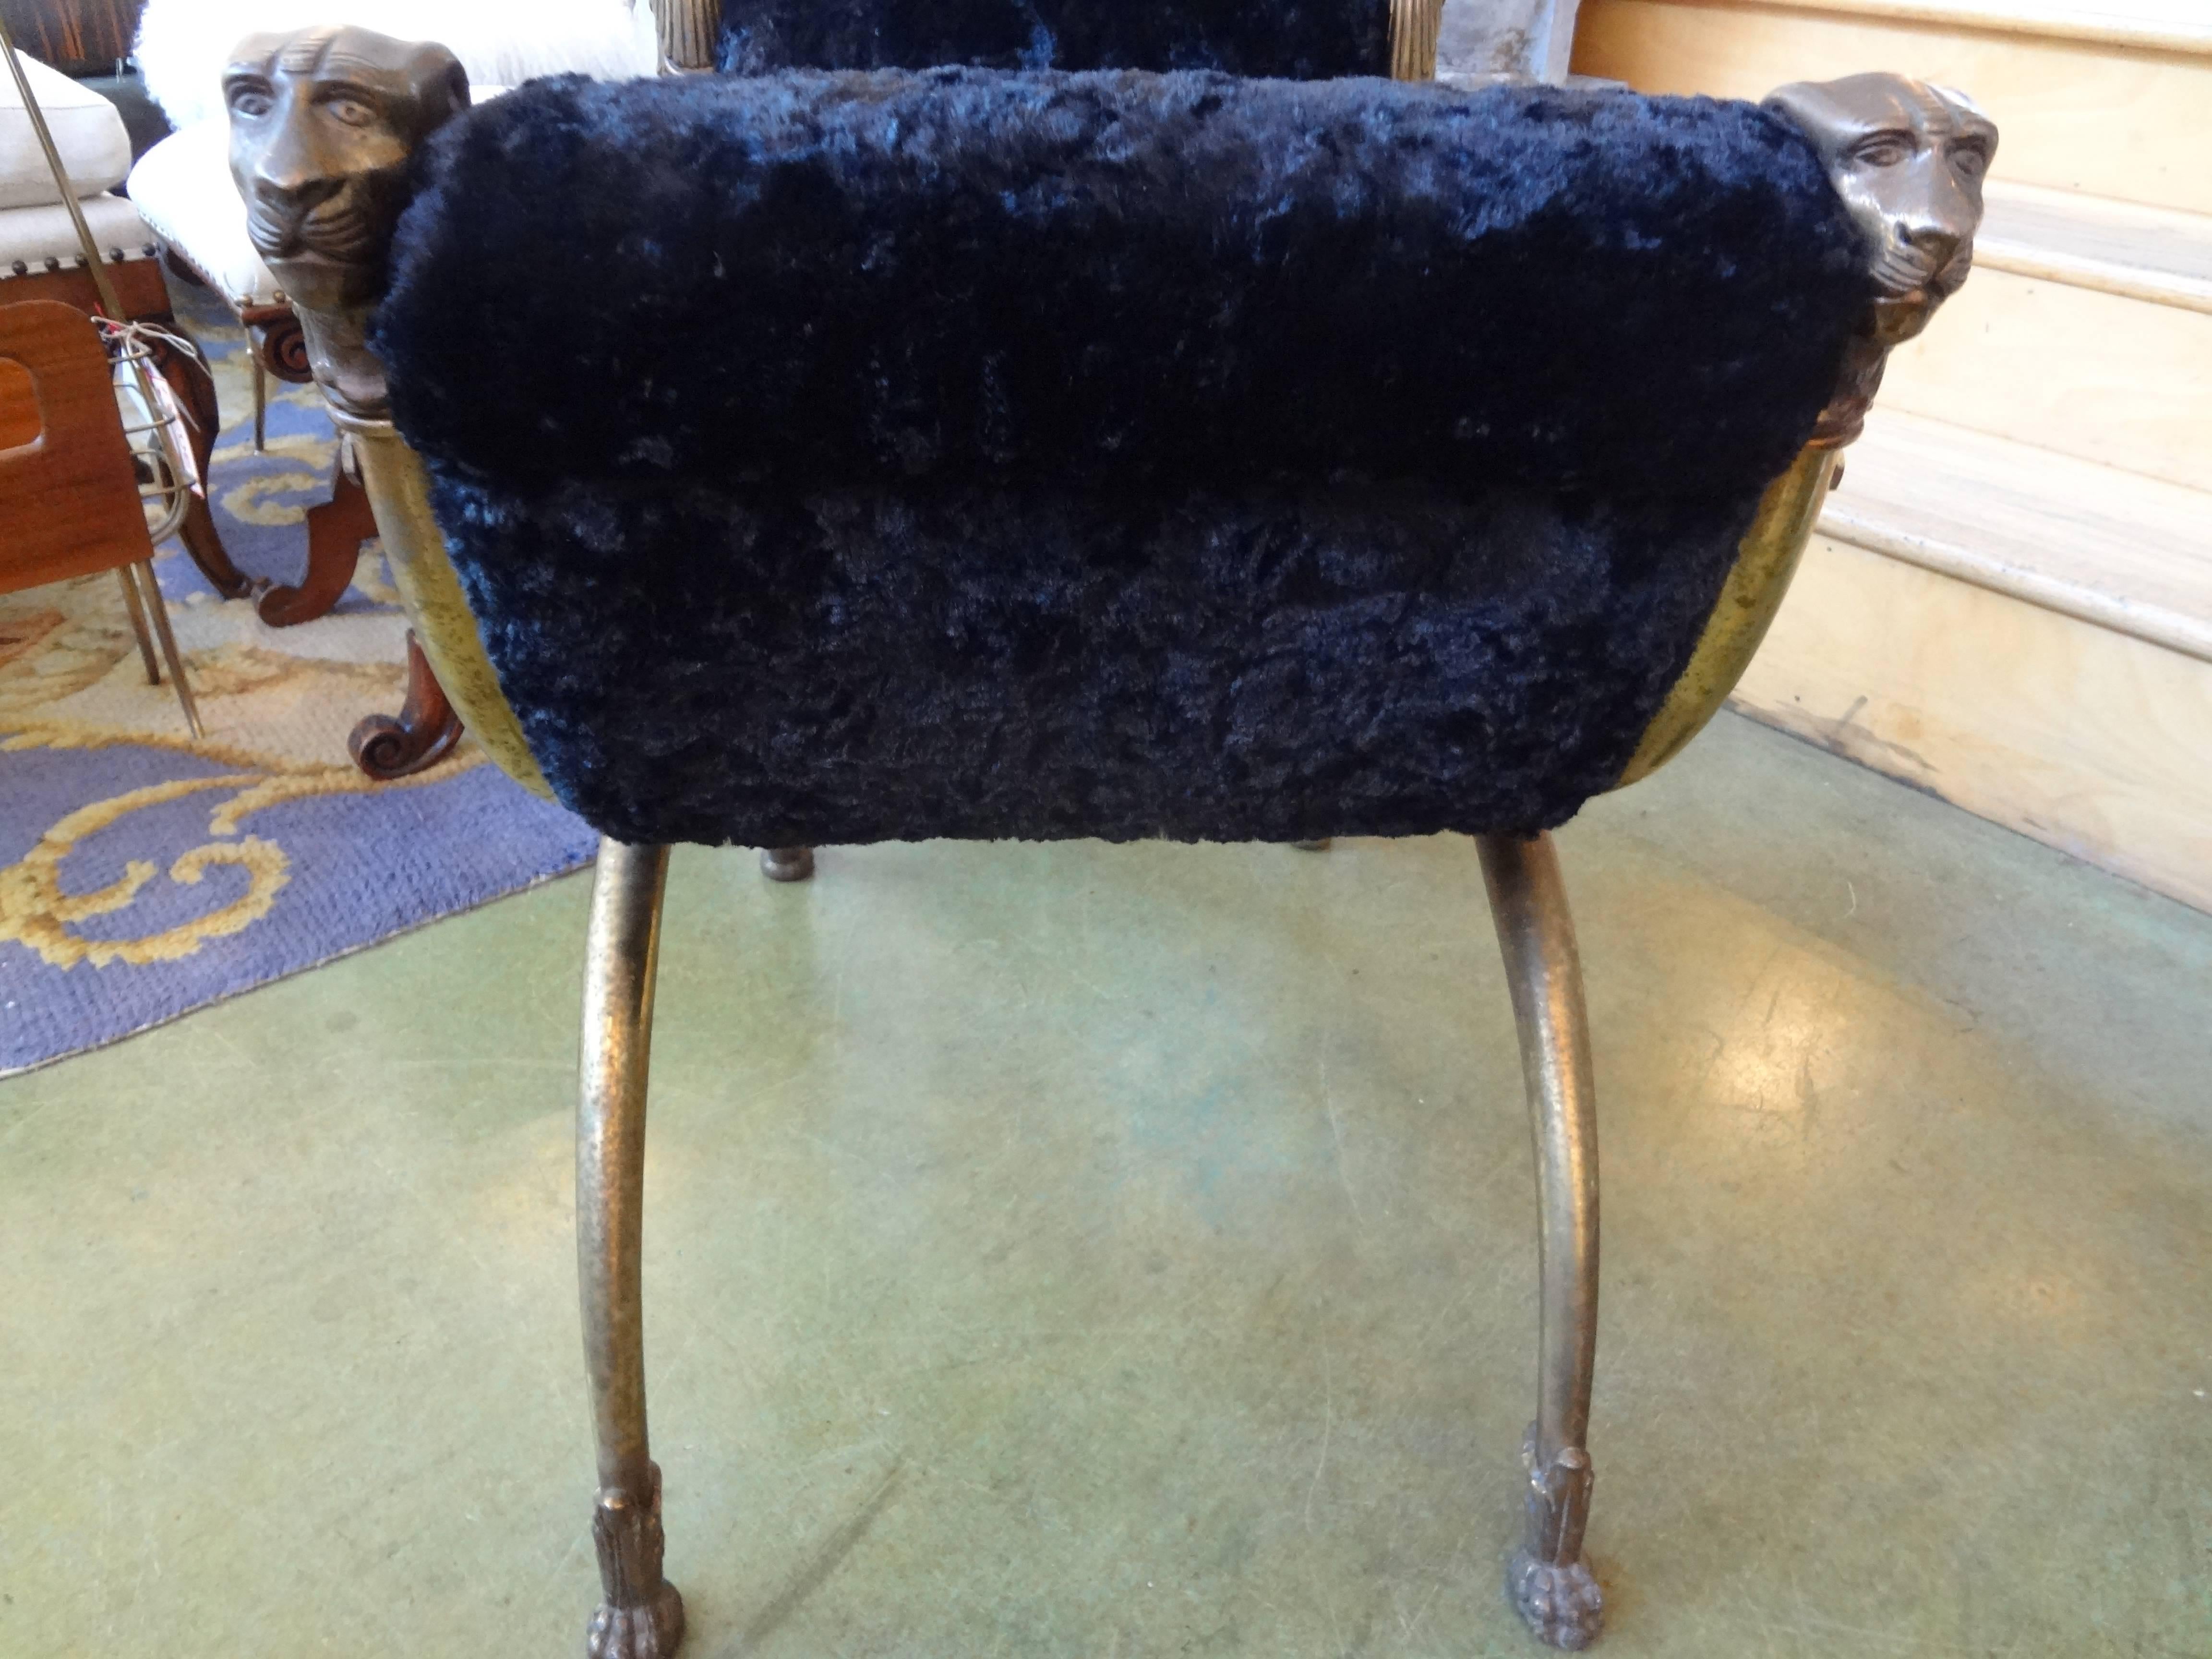 Rare Stunning Antique French curule bronze bench, 1920's Retour d'Egypte newly upholstered in black faux rabbit pelt.

Please click KIRBY ANTIQUES logo below to view additional pieces from our vast inventory.
